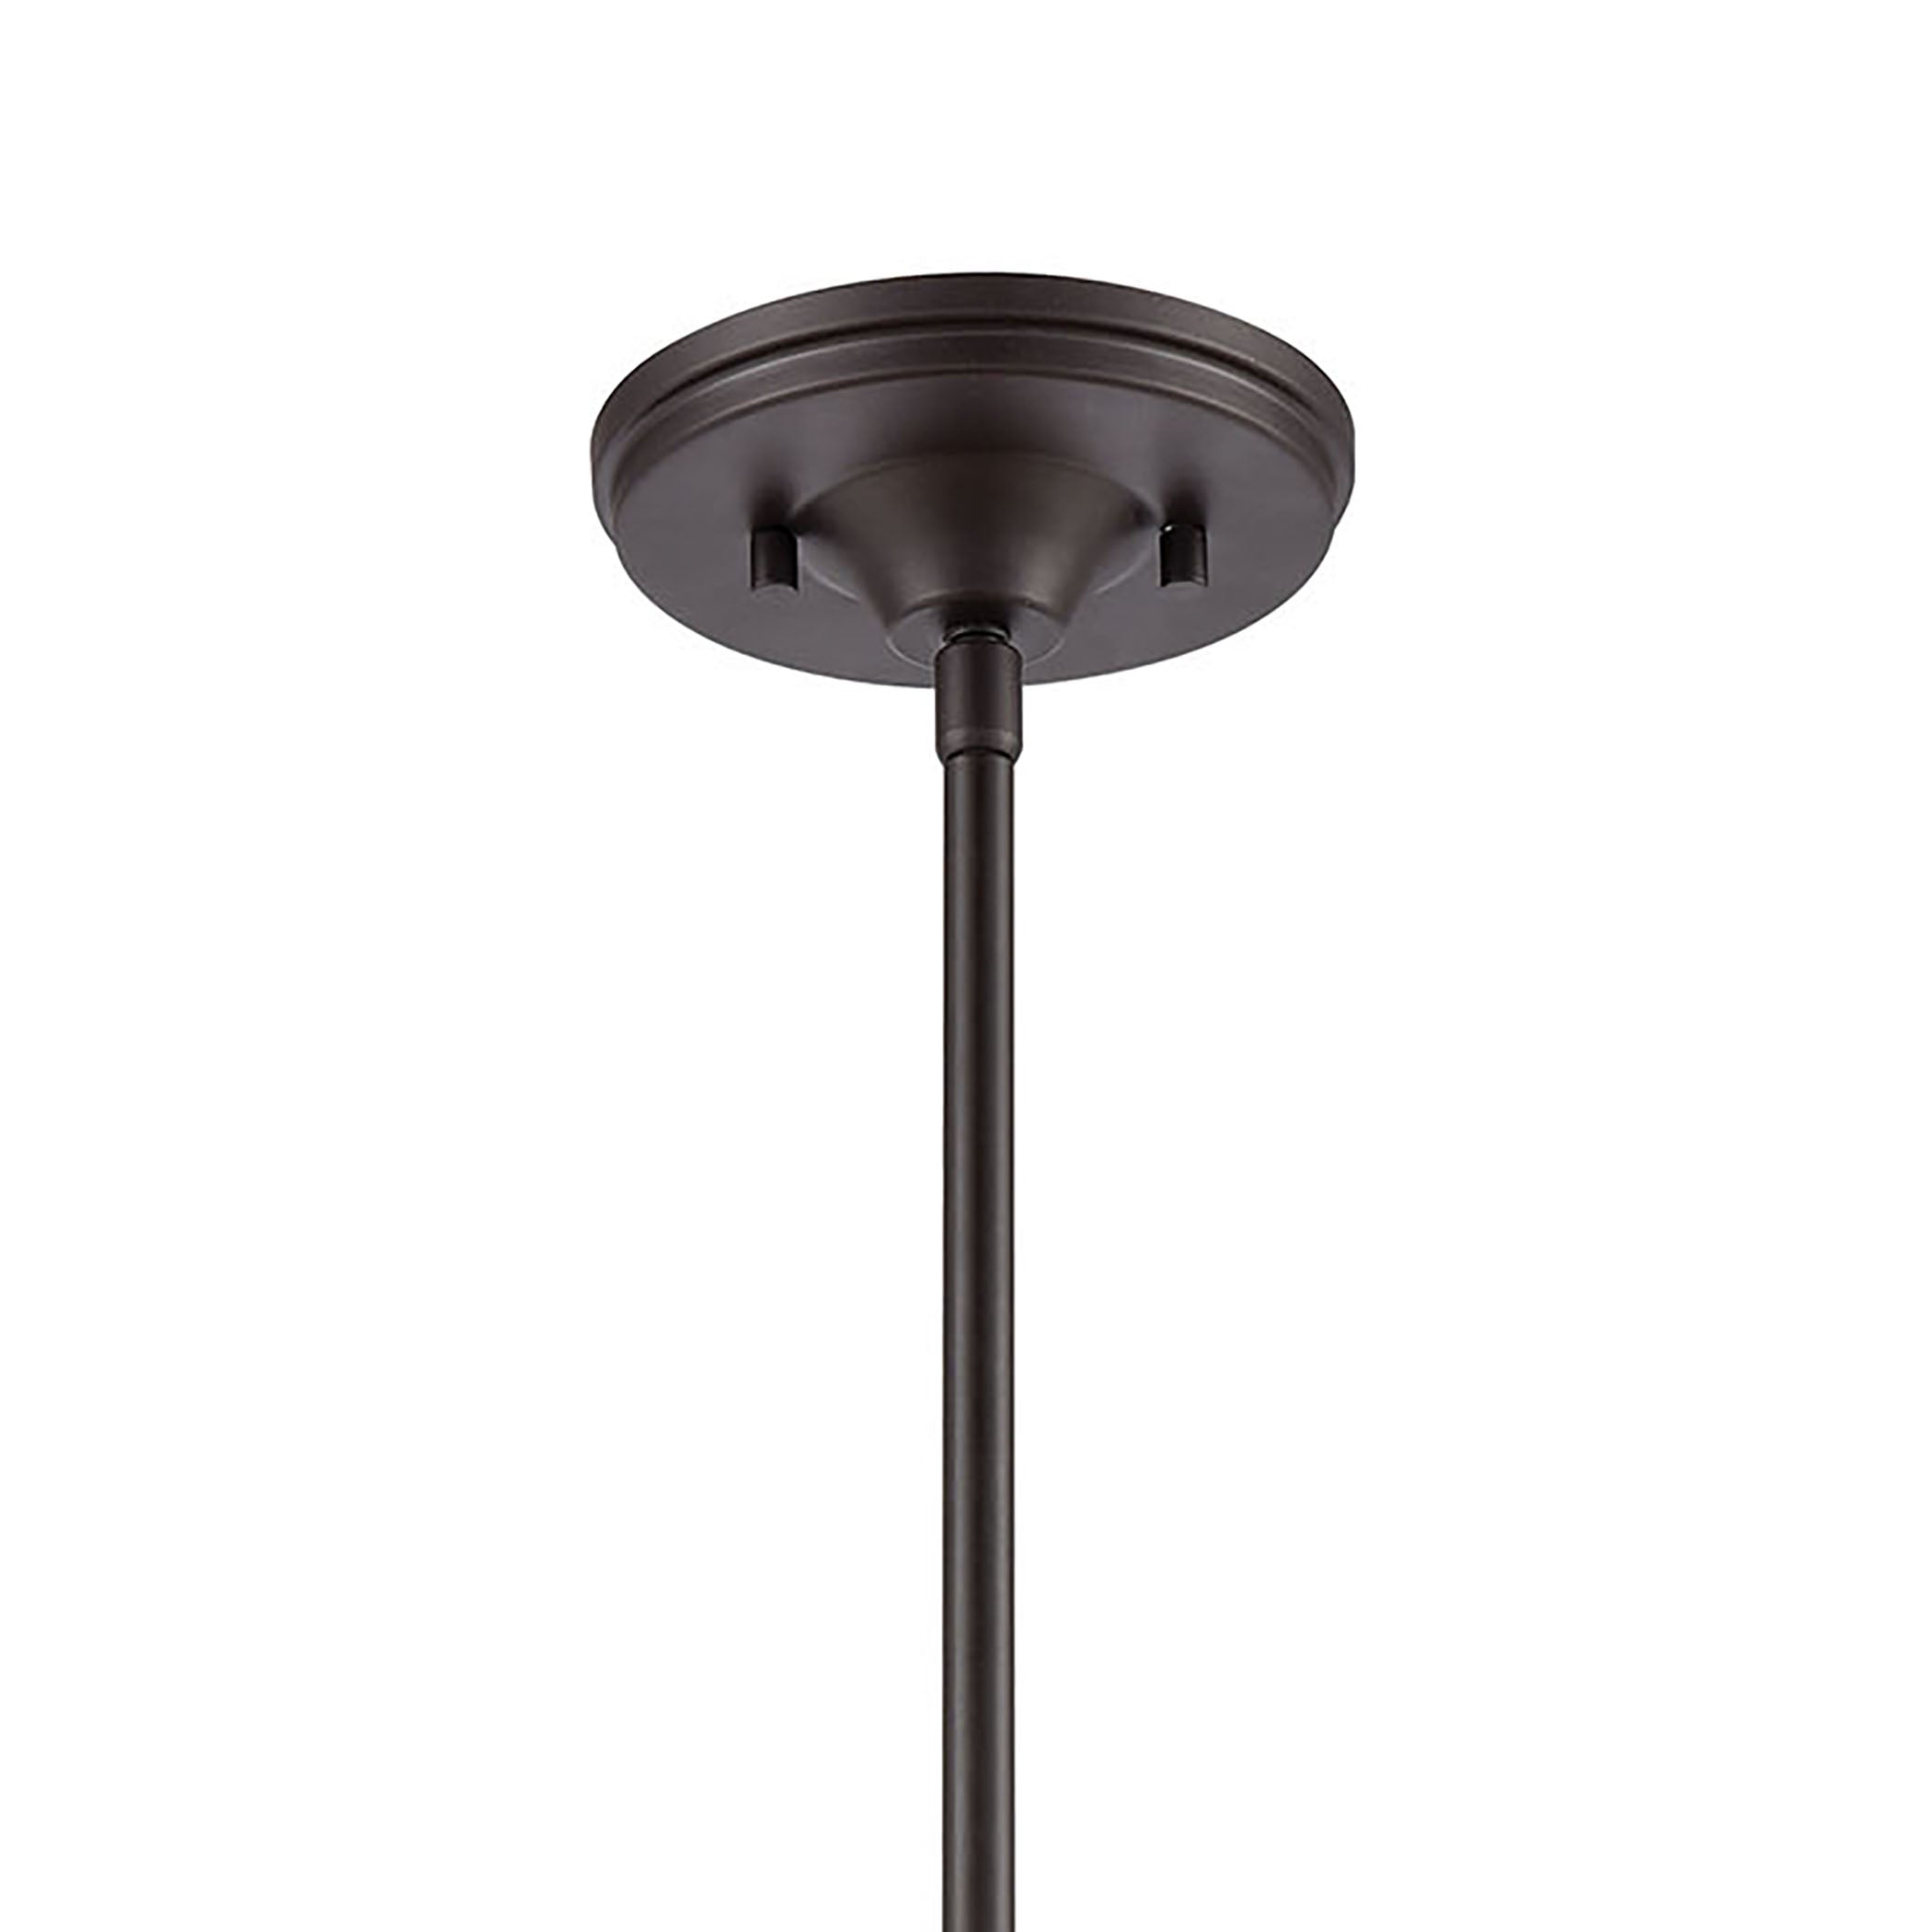 ELK Lighting 46565/1 Manhattan Boutique 1-Light Mini Pendant in Oil Rubbed Bronze with Clear Glass